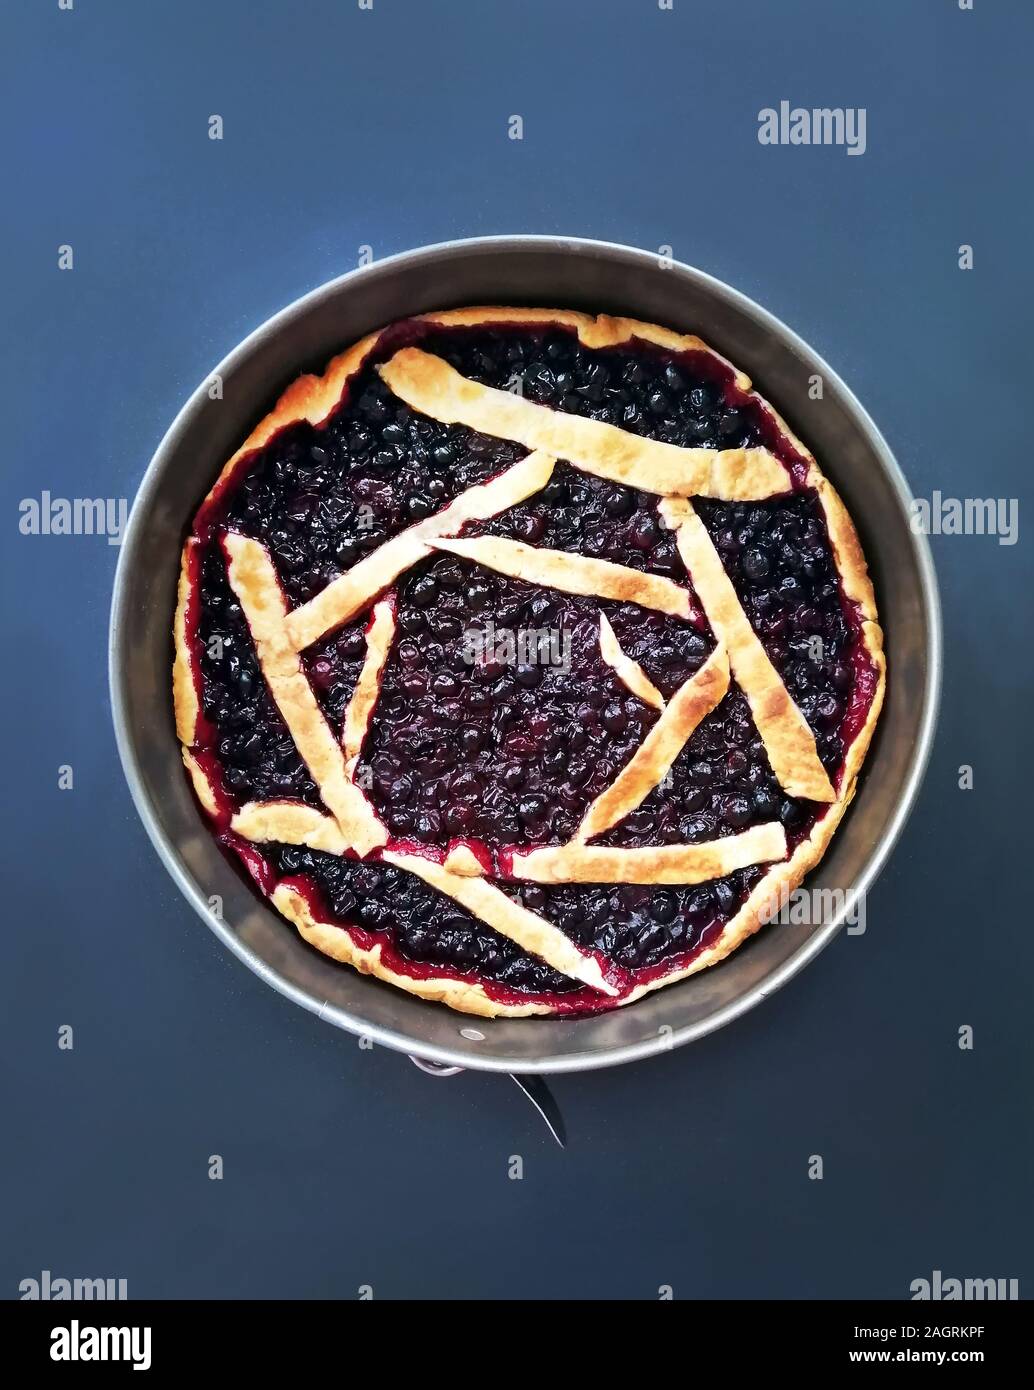 Round cake with black berries currant on a blue background, a recipe for sweet pastry from dough Stock Photo